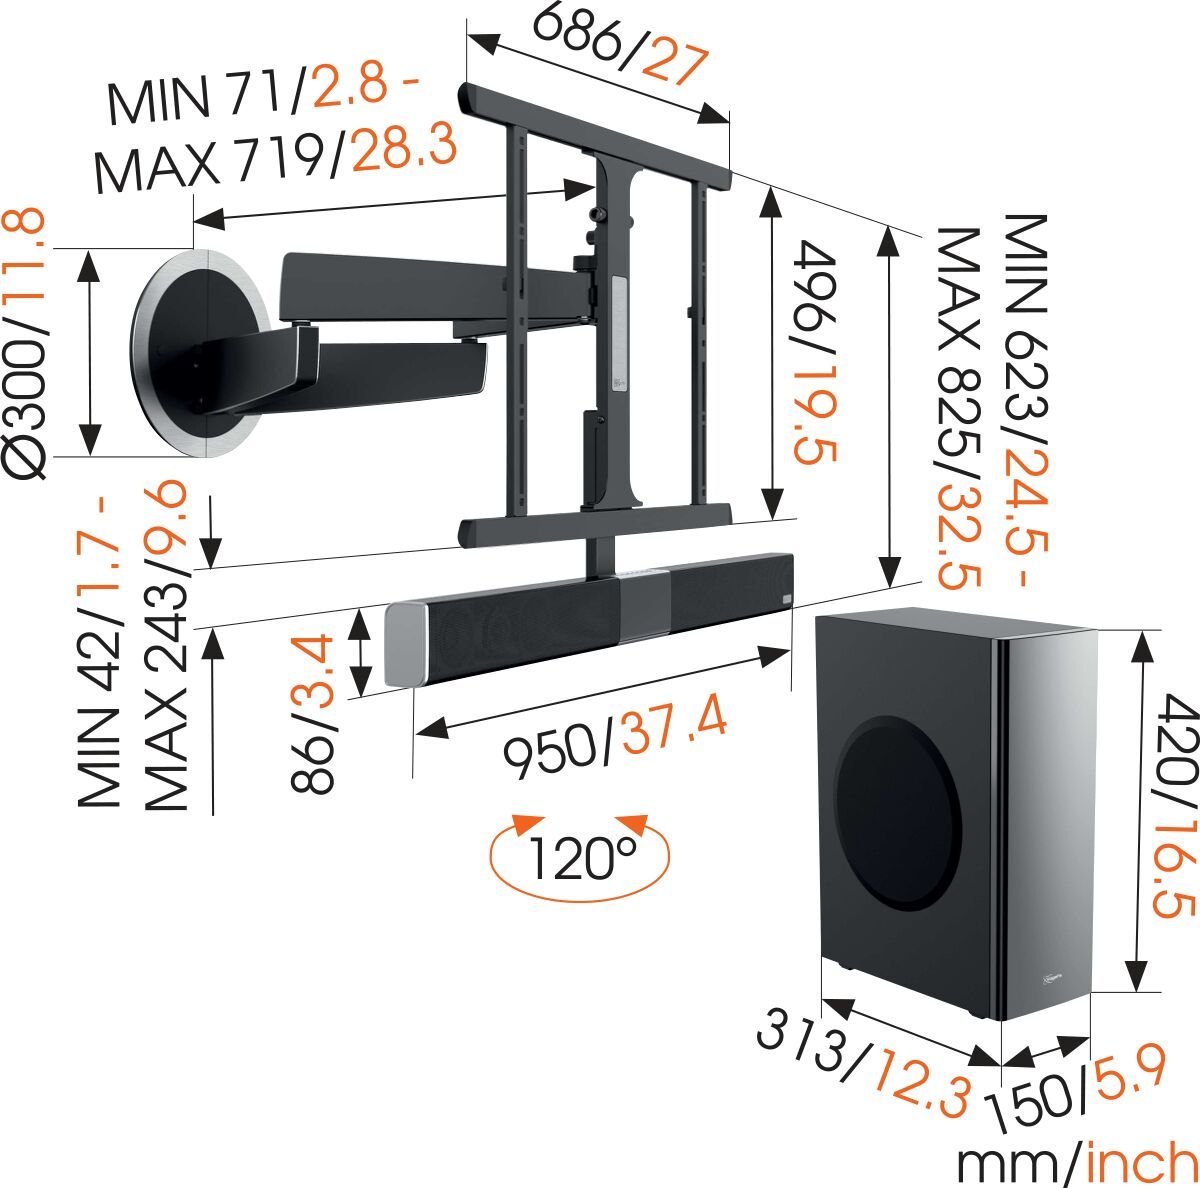 Vogel's MotionSoundMount (NEXT 8375 AU) Full-Motion Motorised TV Wall Mount with Integrated Sound 40 65 Motion (up to 120°) Dimensions